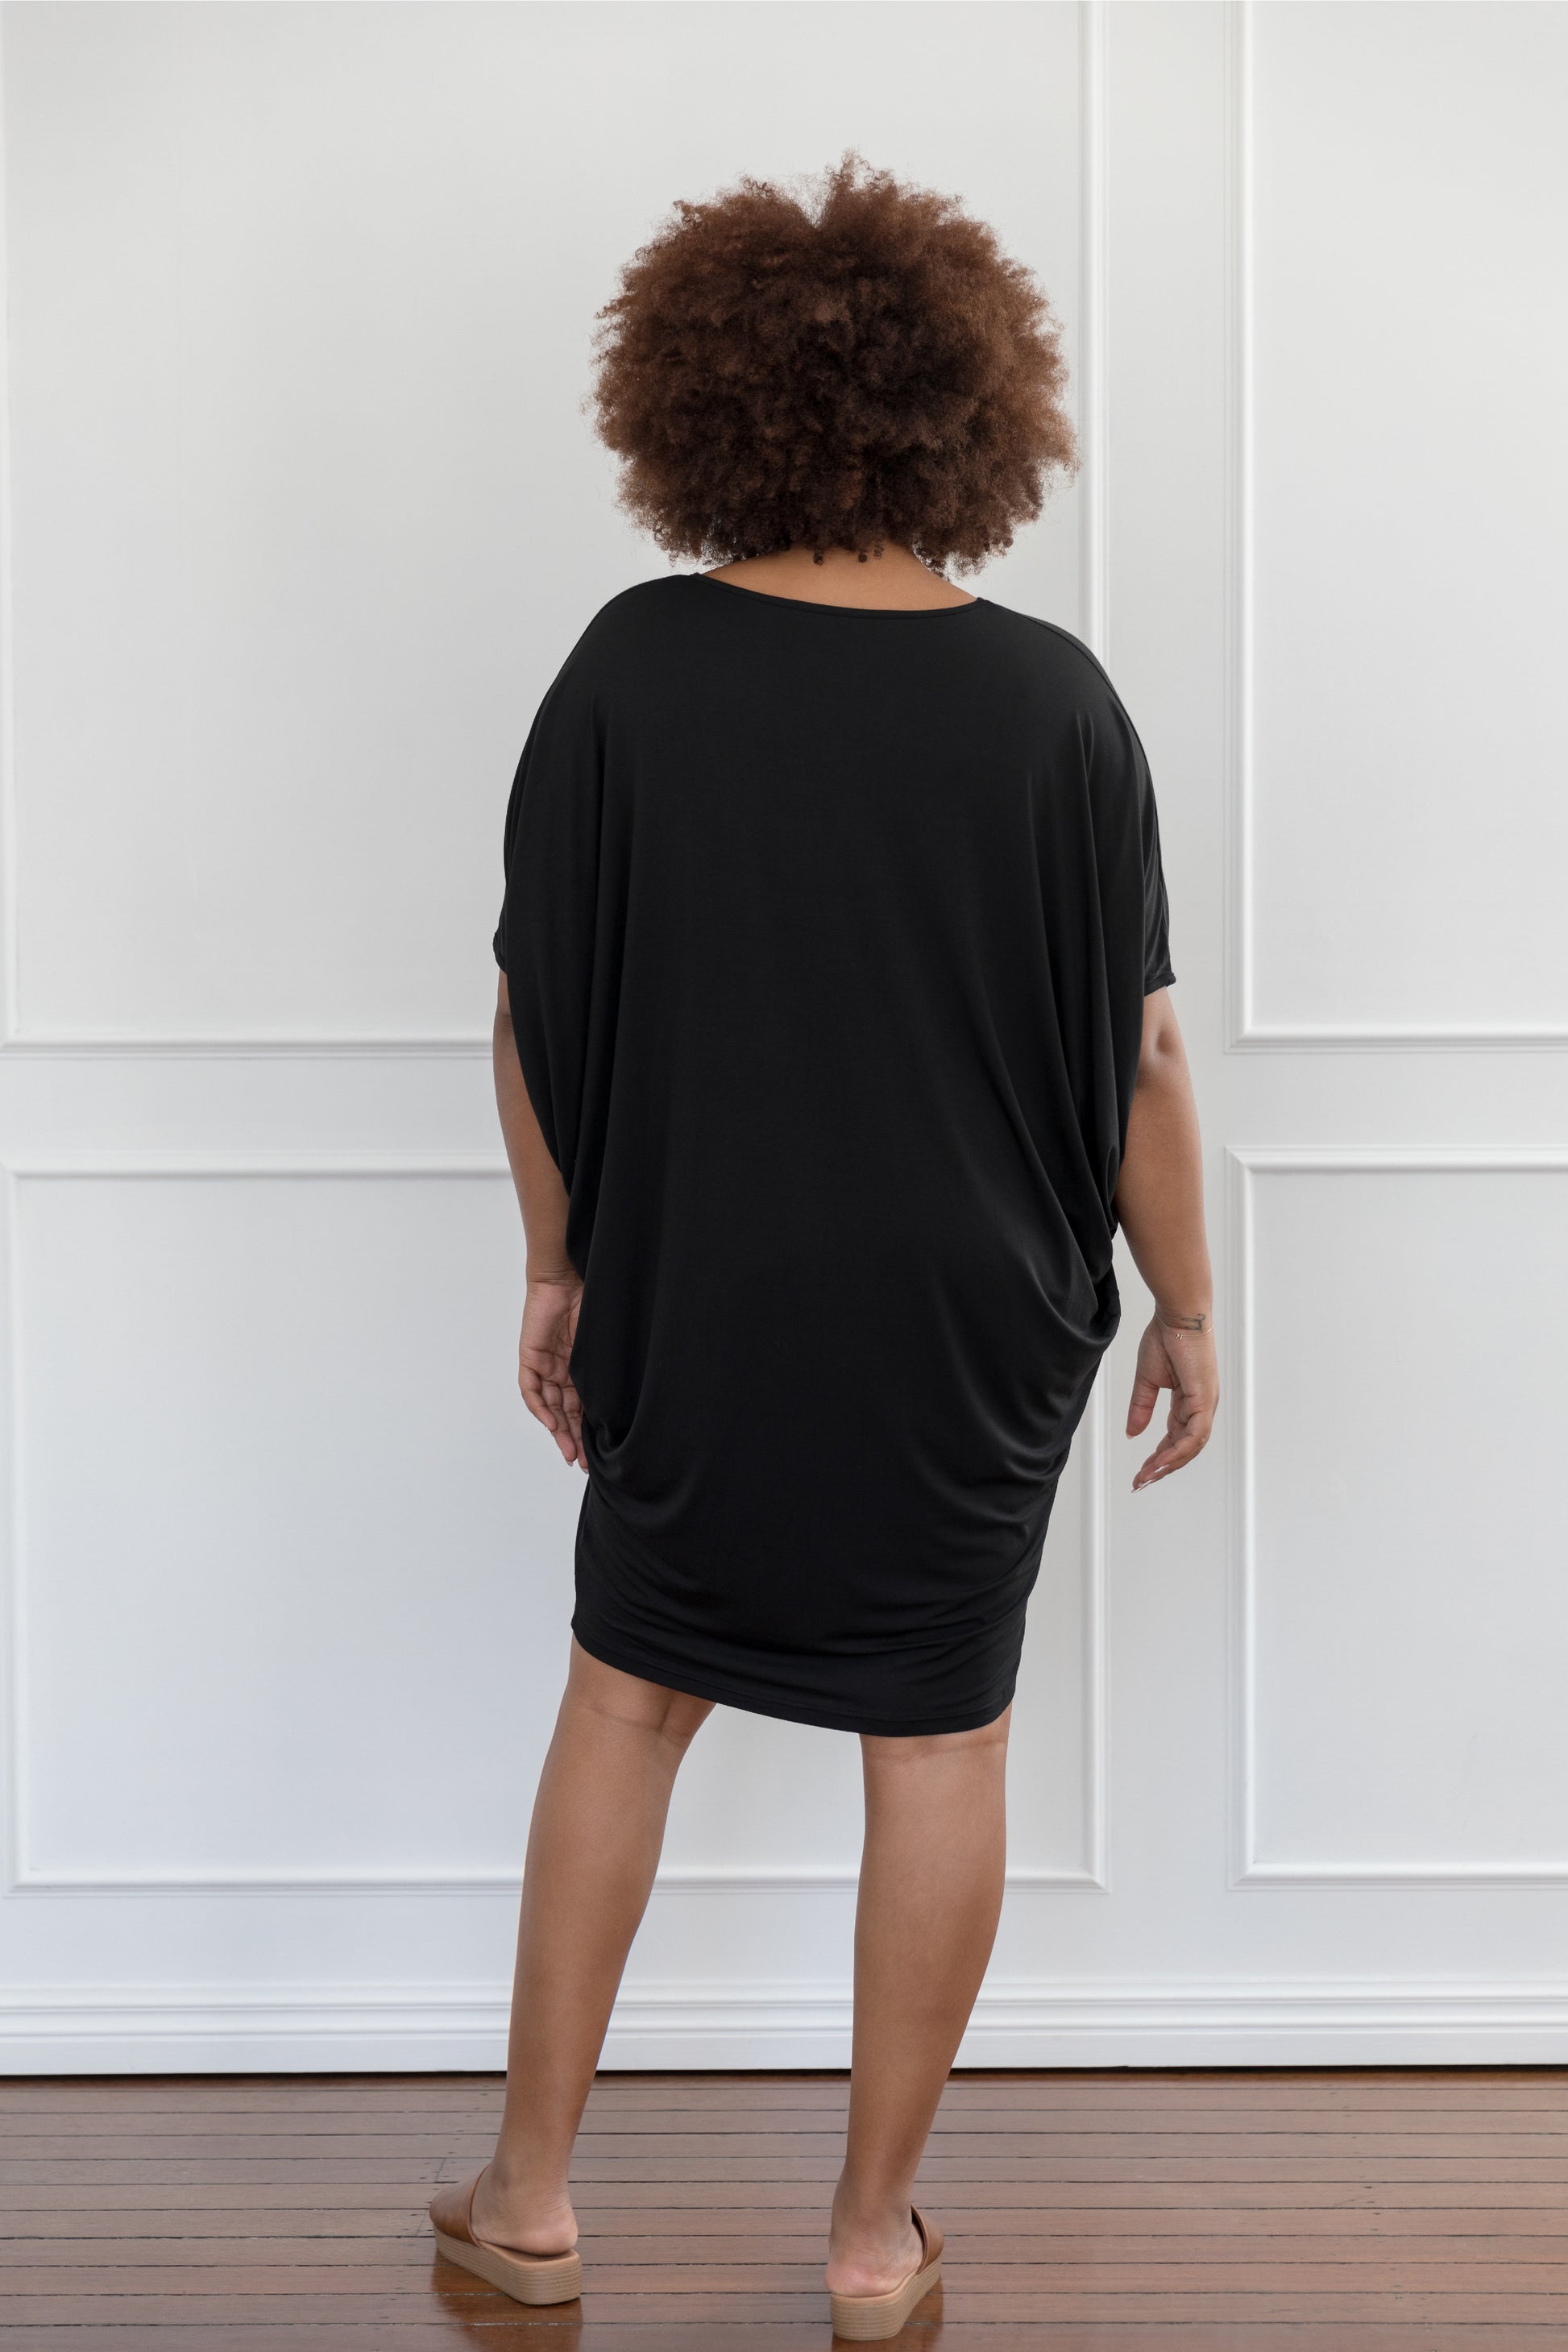 Plus-Sized Black Dresses | PQ Collection | Miracle Dress